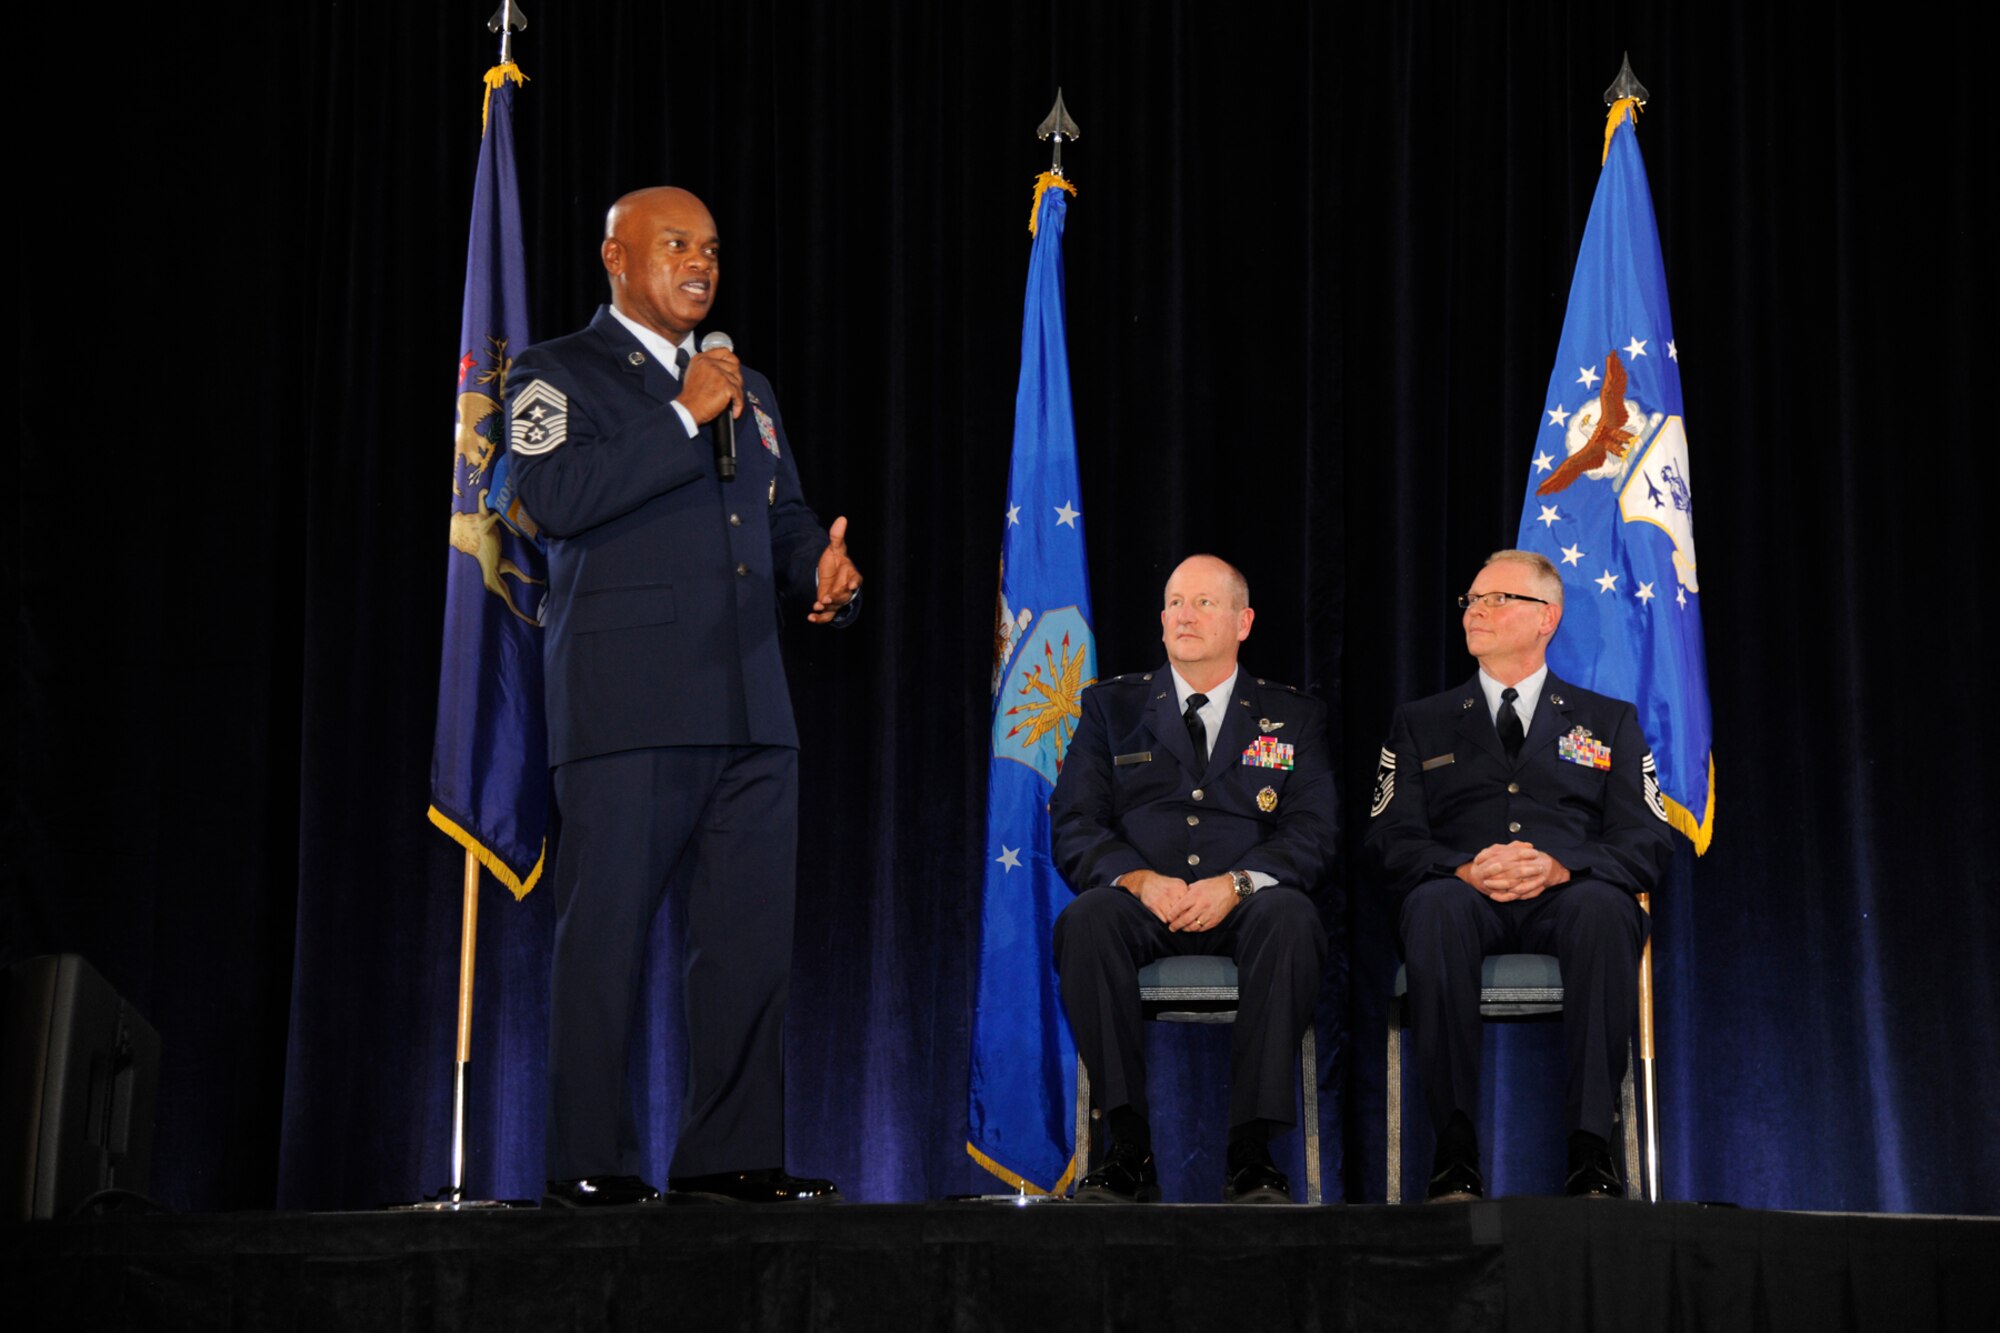 Chief Master Sgt. Tony Whitehead, command chief for the 127th Wing, addresses the Airmen of the Wing after assuming his duties as command chief during the Wing’s annual awards ceremony at Selfridge Air National Guard Base, Mich., Dec. 5, 2015. Listening to Whitehead are 127th Wing Commander Brig. Gen. John D. Slocum and 127th Wing Command Chief Master Sgt. Robert Dobson. (U.S. Air National Guard photo by Senior Airman Ryan Zeski)